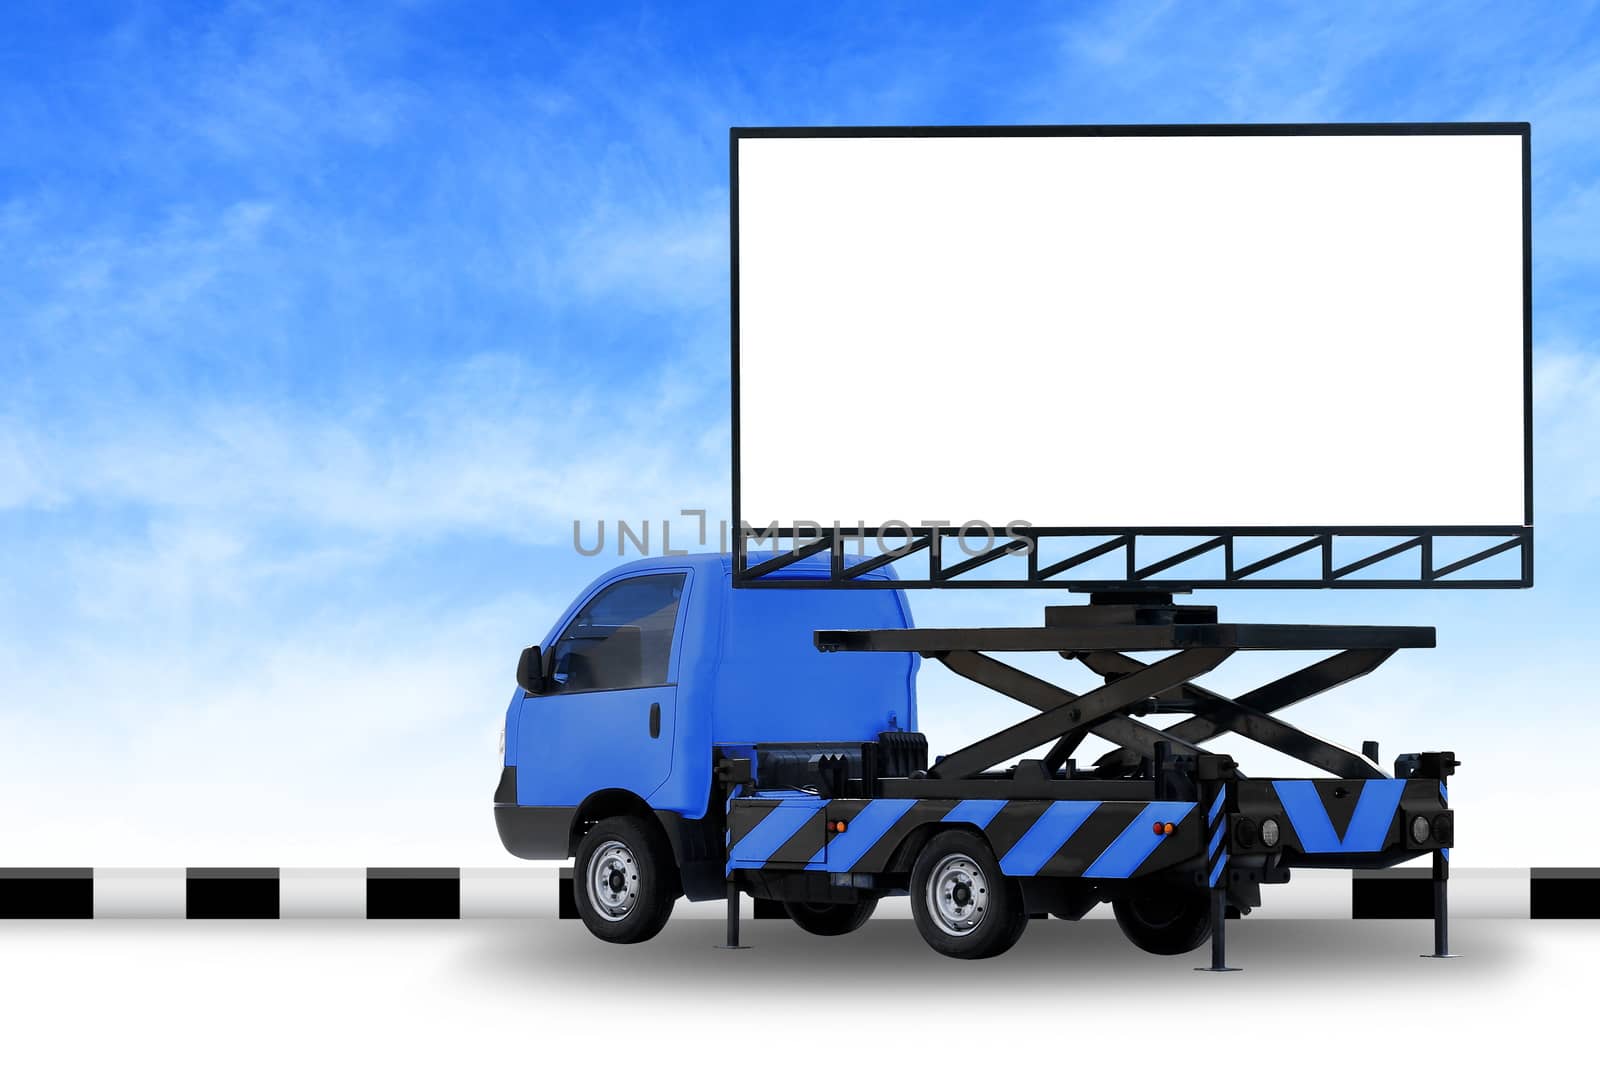 Billboard blank on car blue truck LED panel for sign Advertising isolated on background sky, Large banner and billboard Roadside for an advertisement large by cgdeaw